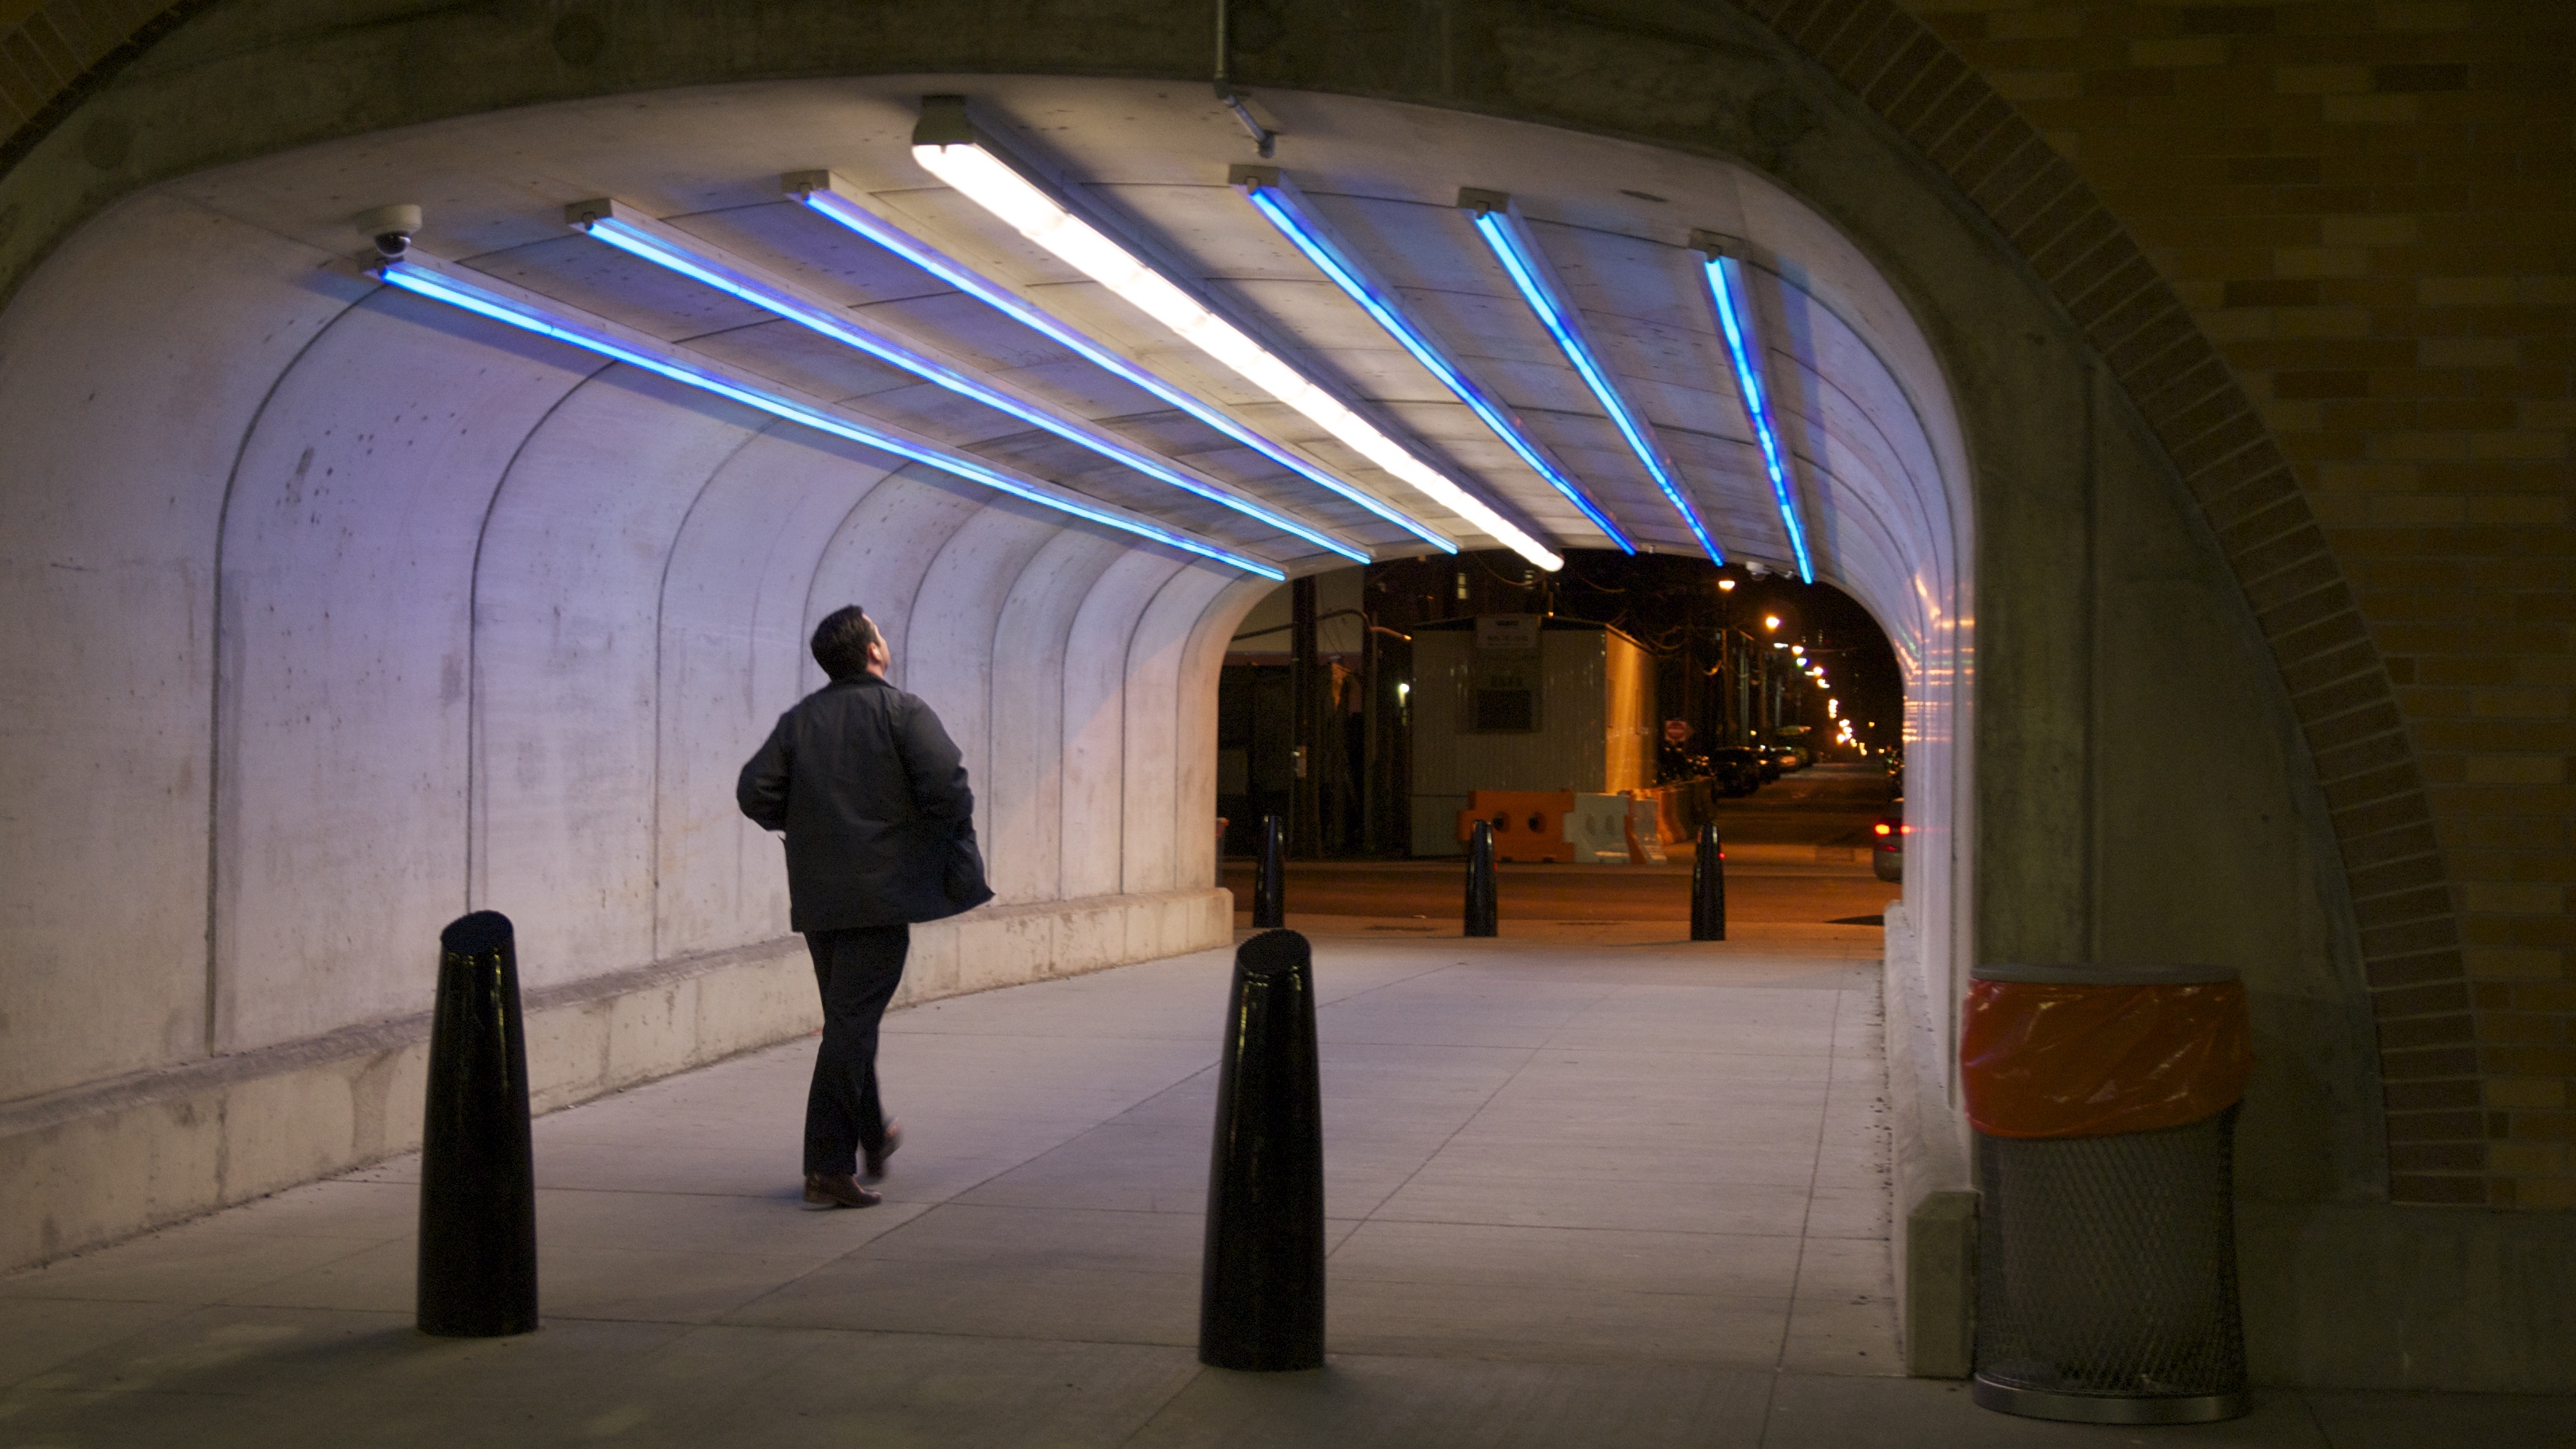 New pedestrian tunnel on Clinton Street underneath the rebuilt viaduct, illuminated by newly-installed LED uplighting.